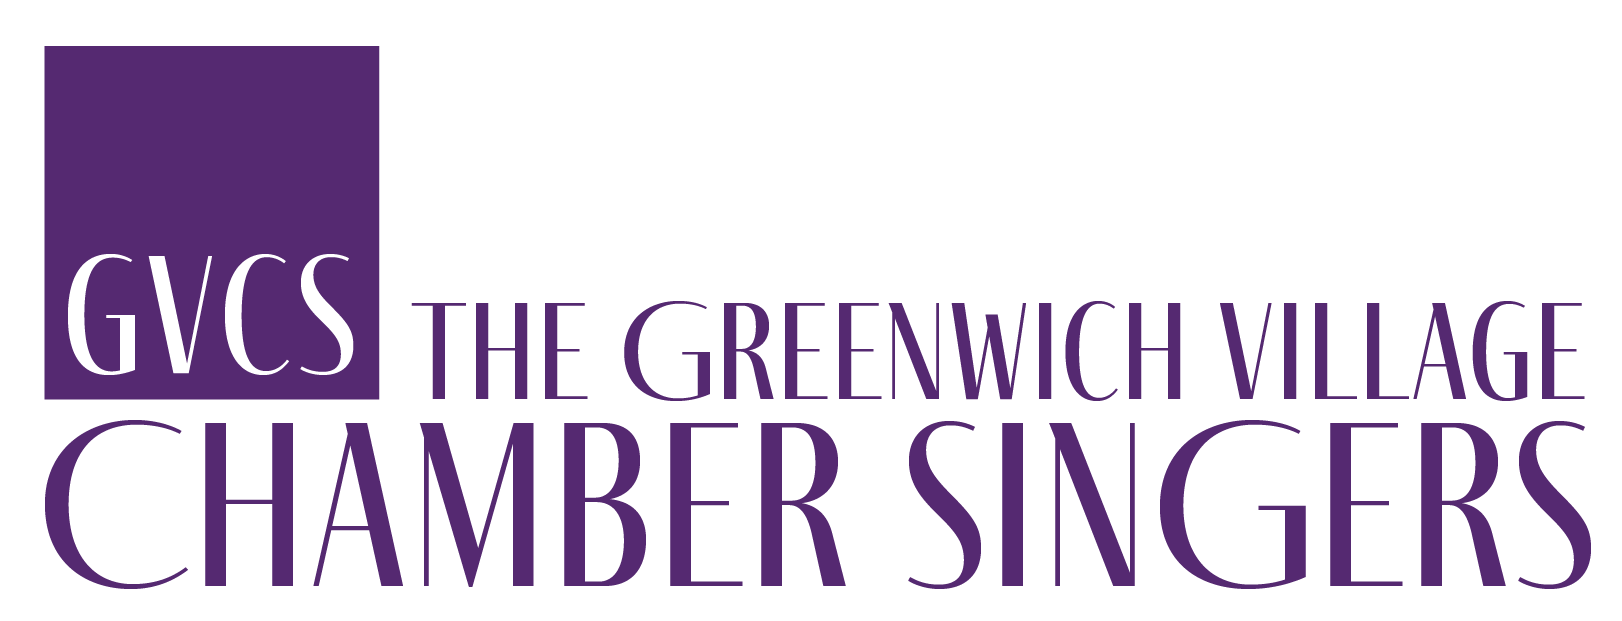 The Greenwich Village Chamber Singers